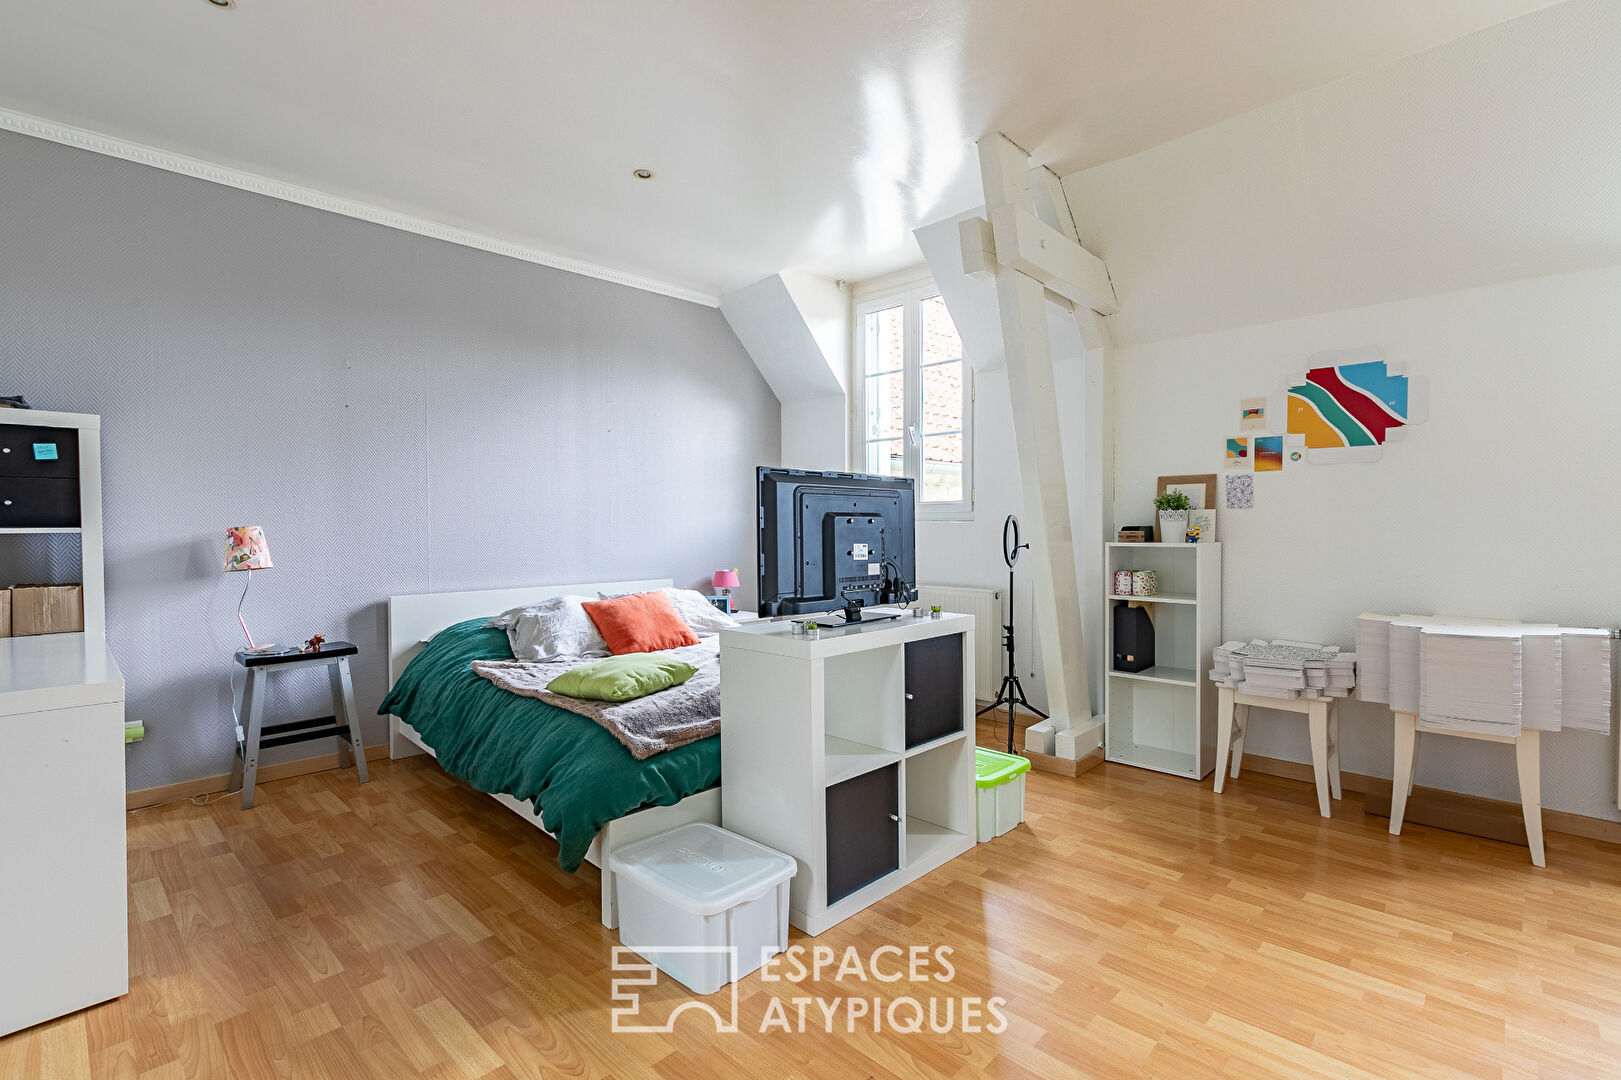 Atypical 19th century family house renovated near Pierrefonds